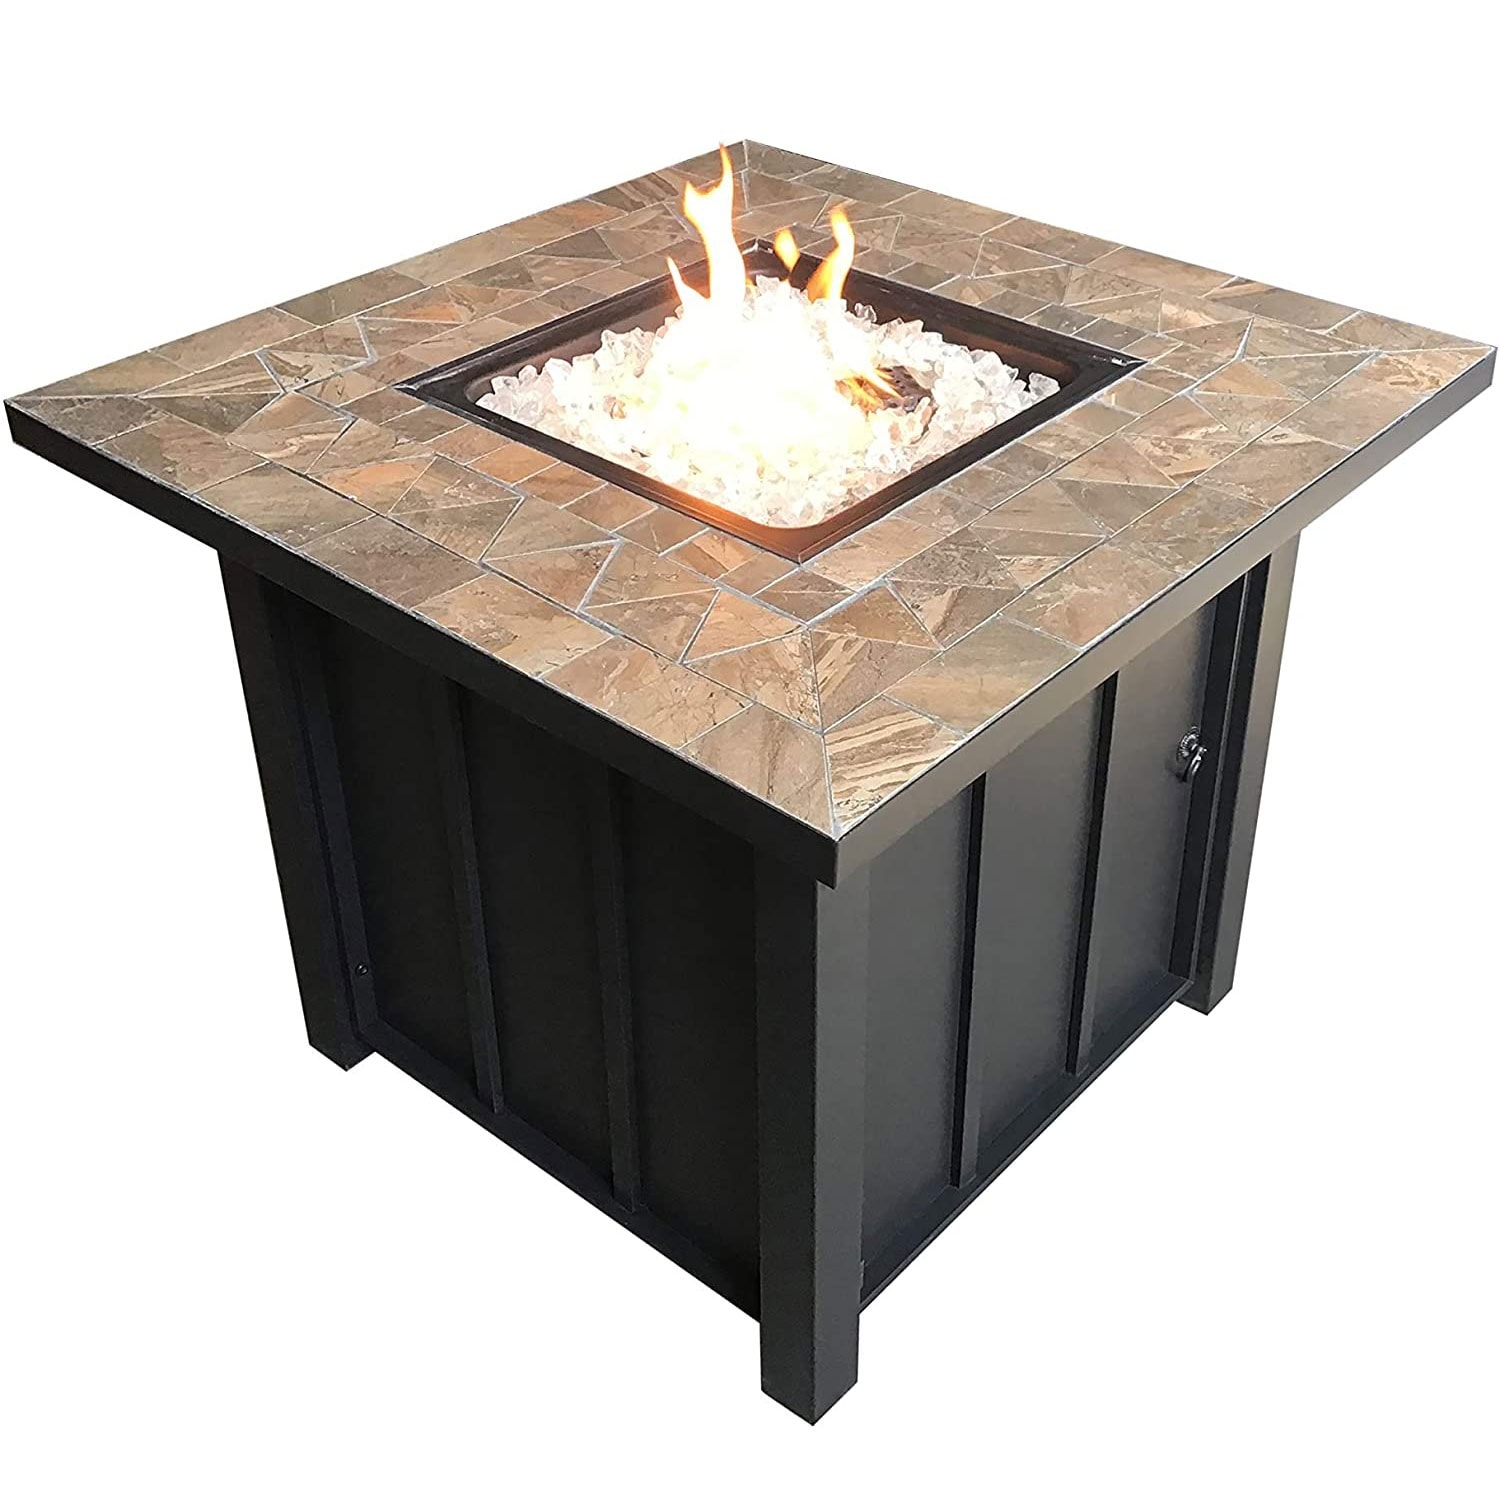 Hiland AFP-STT Outdoor 30 In Square Tile Table Top Propane Fire Pit and Fire Glass - 66